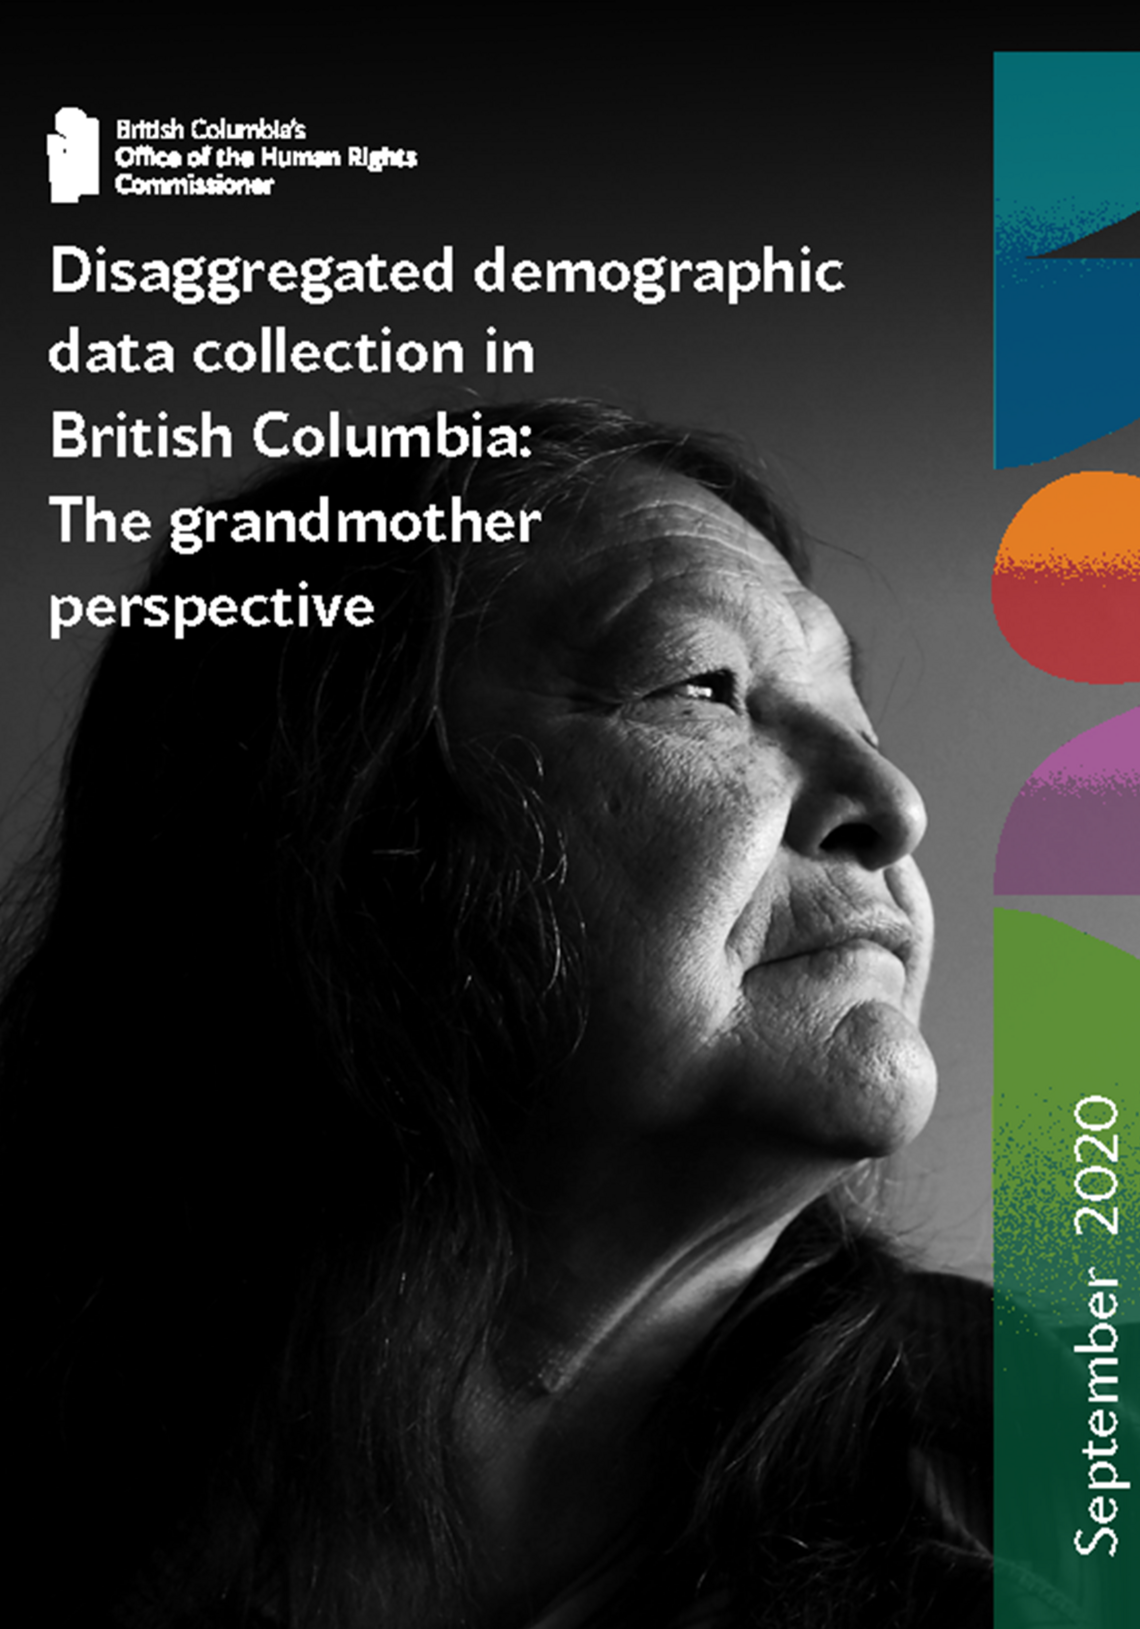 Disaggregated demographic data collection in British Columbia: The grandmother perspective | BC's Office of the Human Rights Commissioner